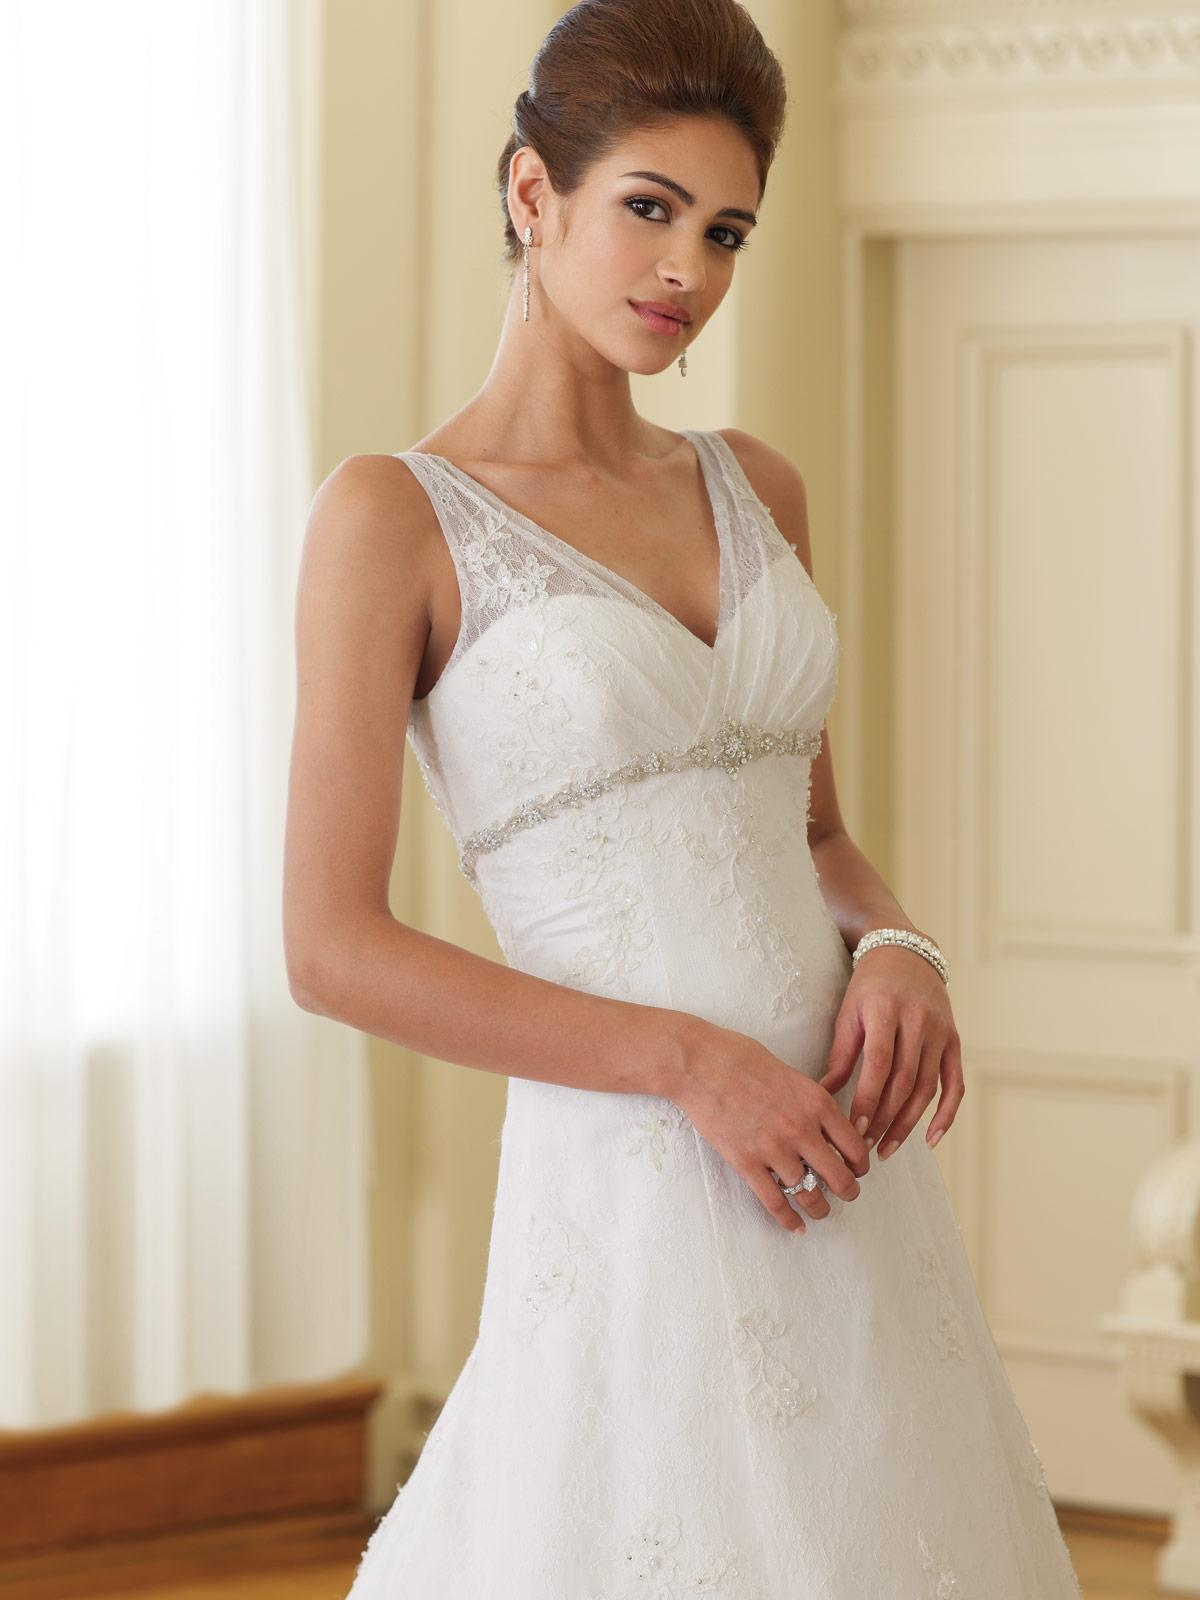 Wedding gowns for petite